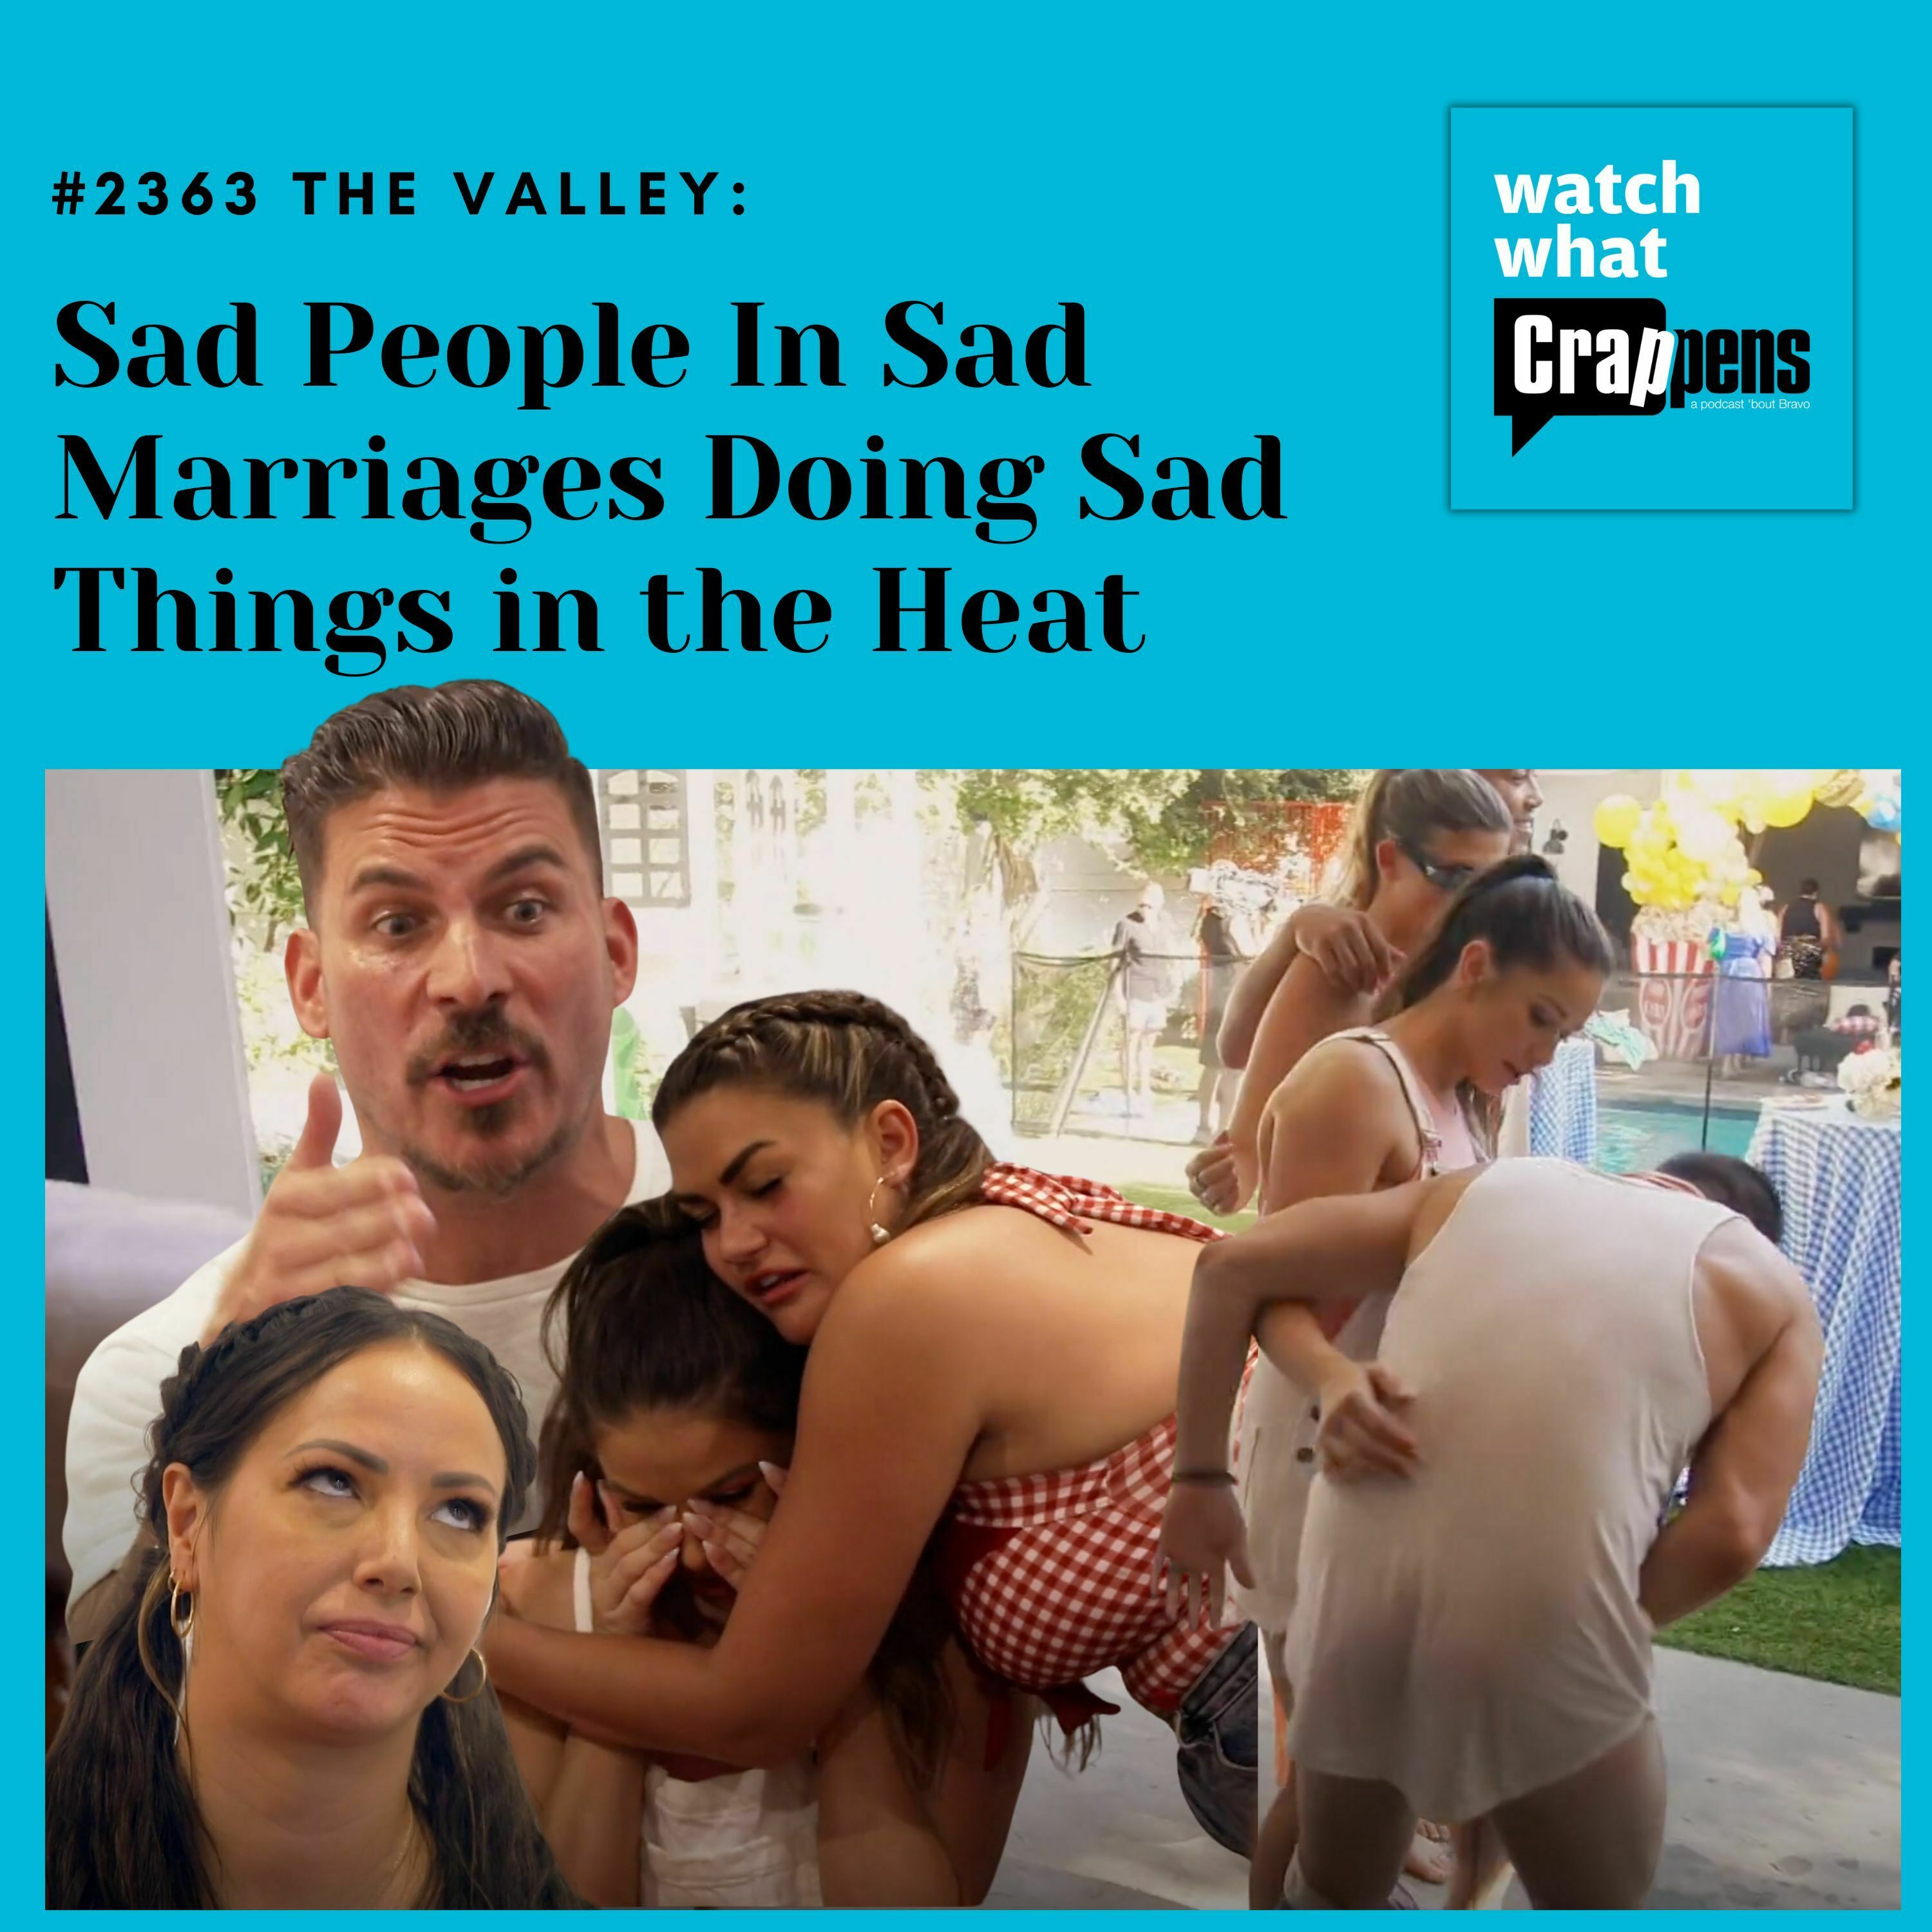 #2363 The Valley: Sad People In Sad Marriages Doing Sad Things in the Heat